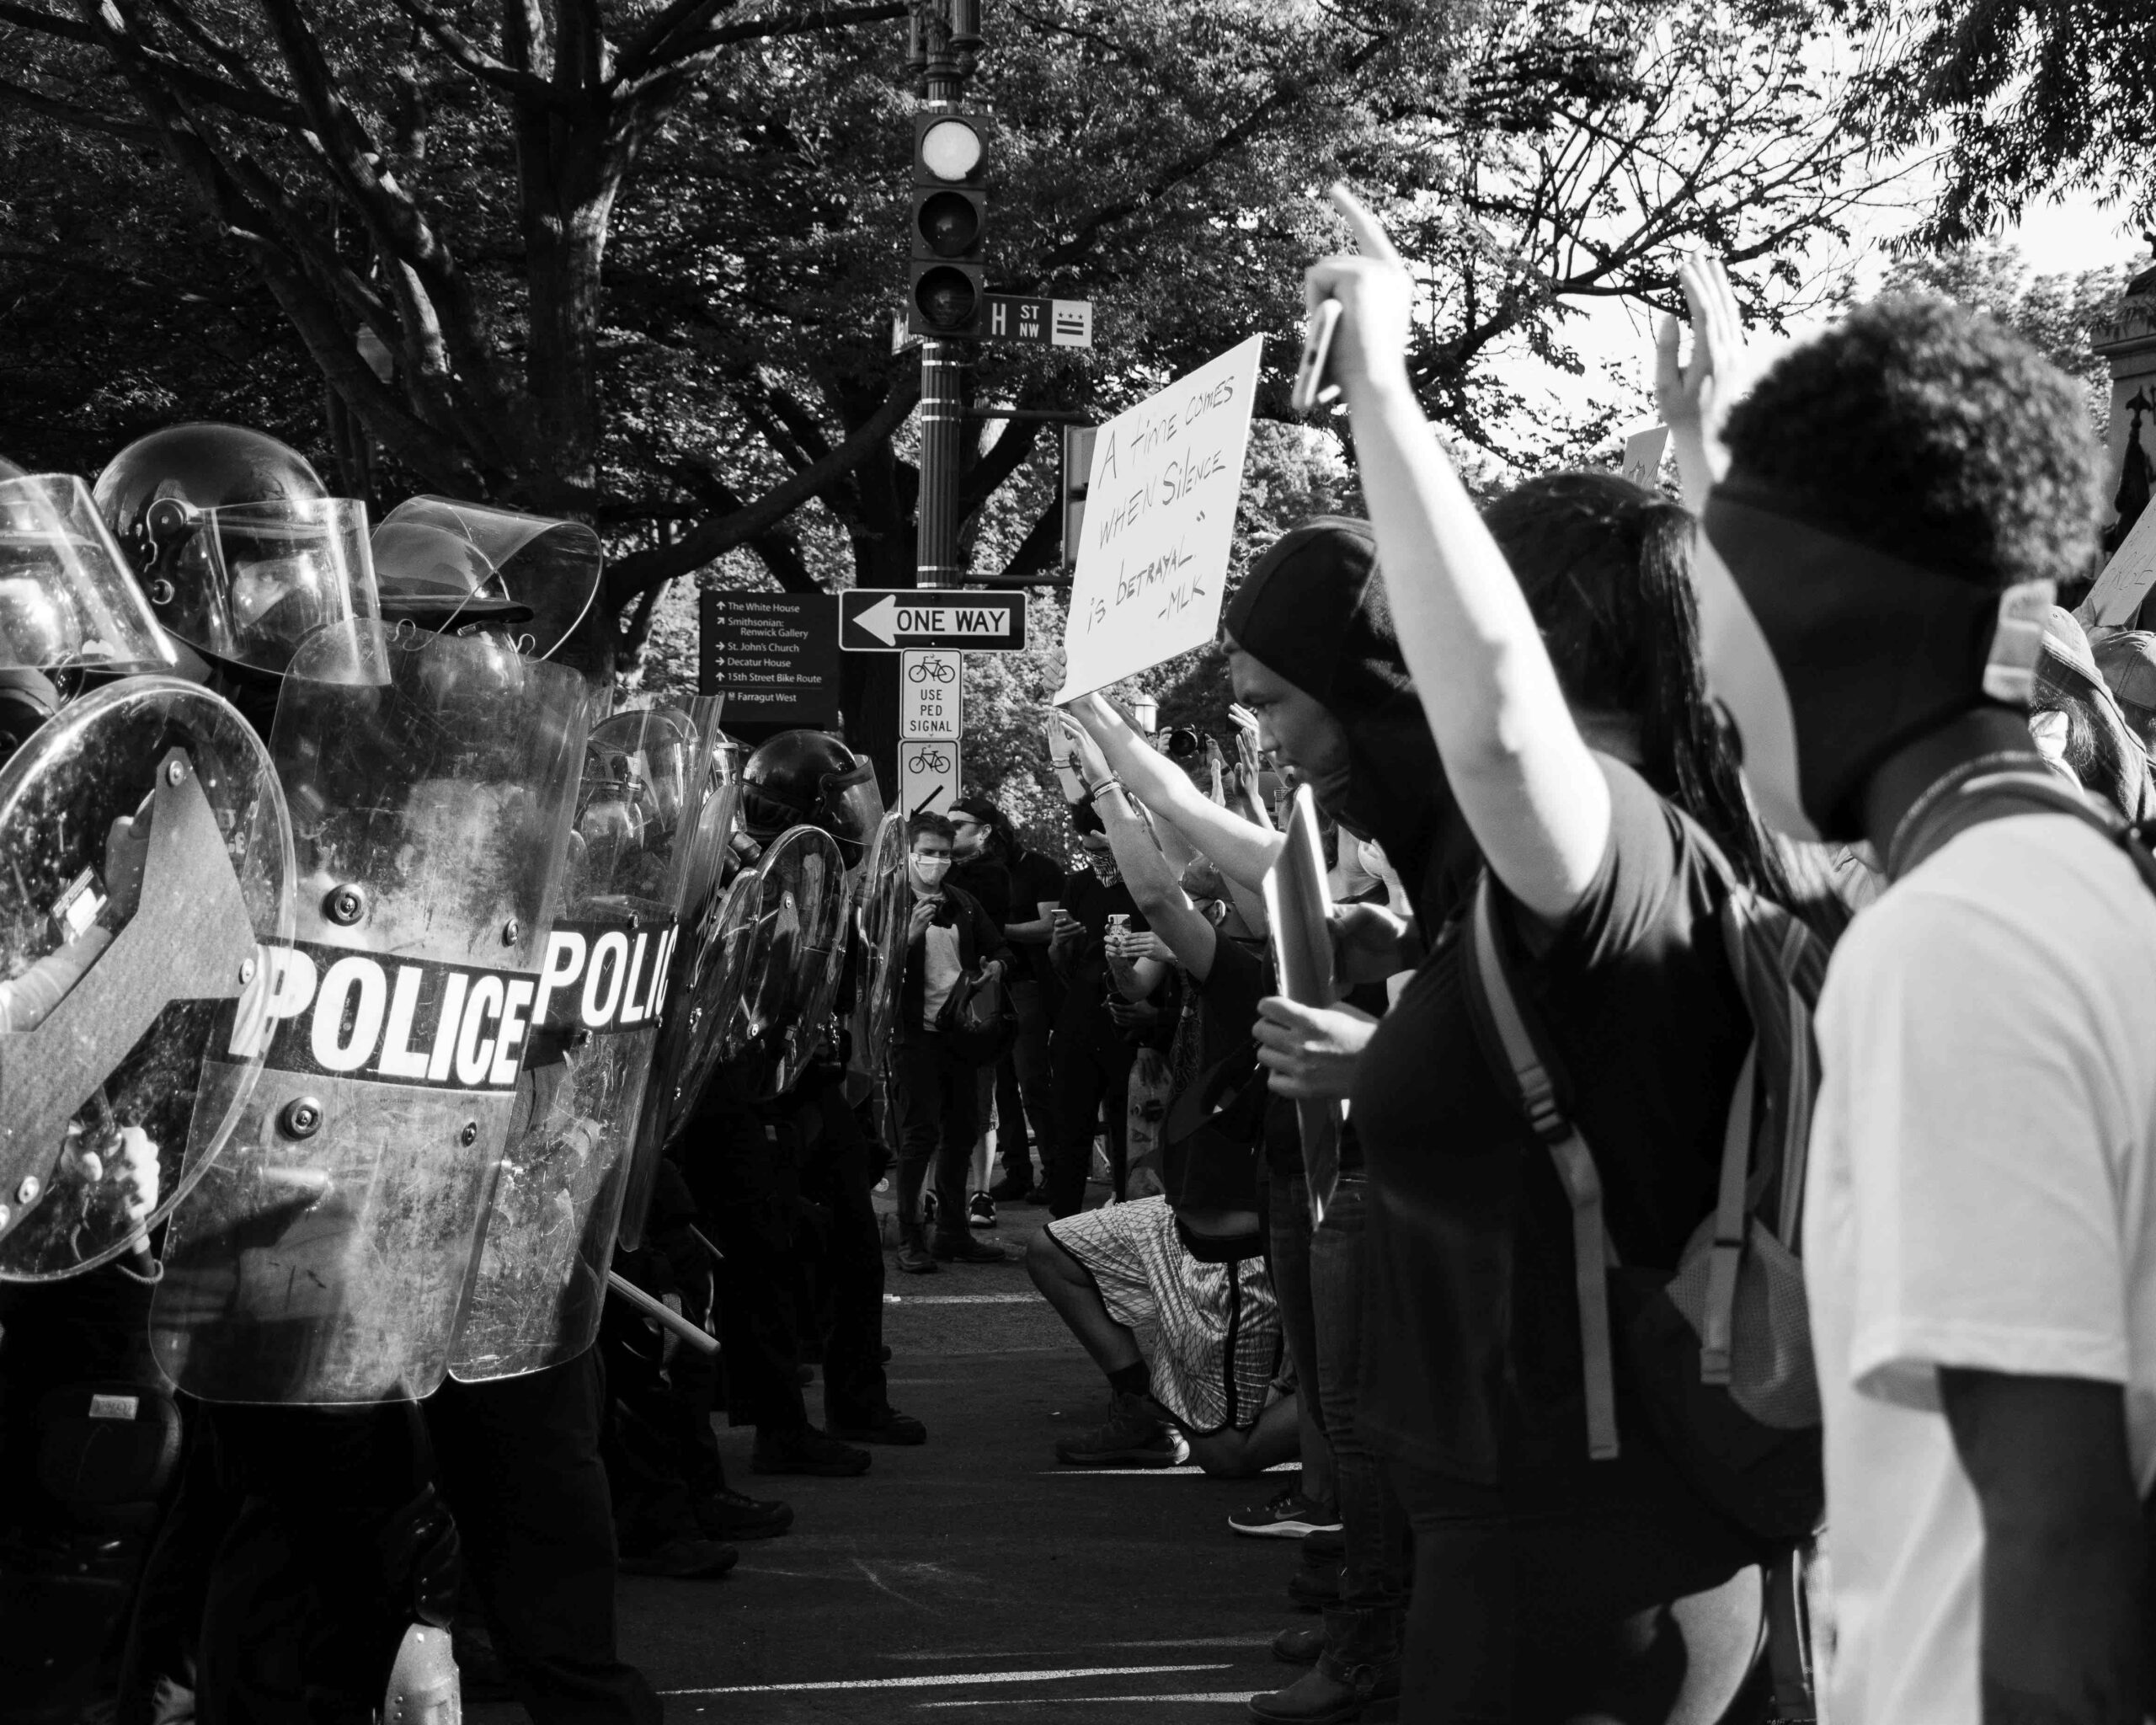 Police and protesters at a Black Lives Matter rally in Washington, D.C., in 2020. (Image: Koshu Kunii/Unsplash)